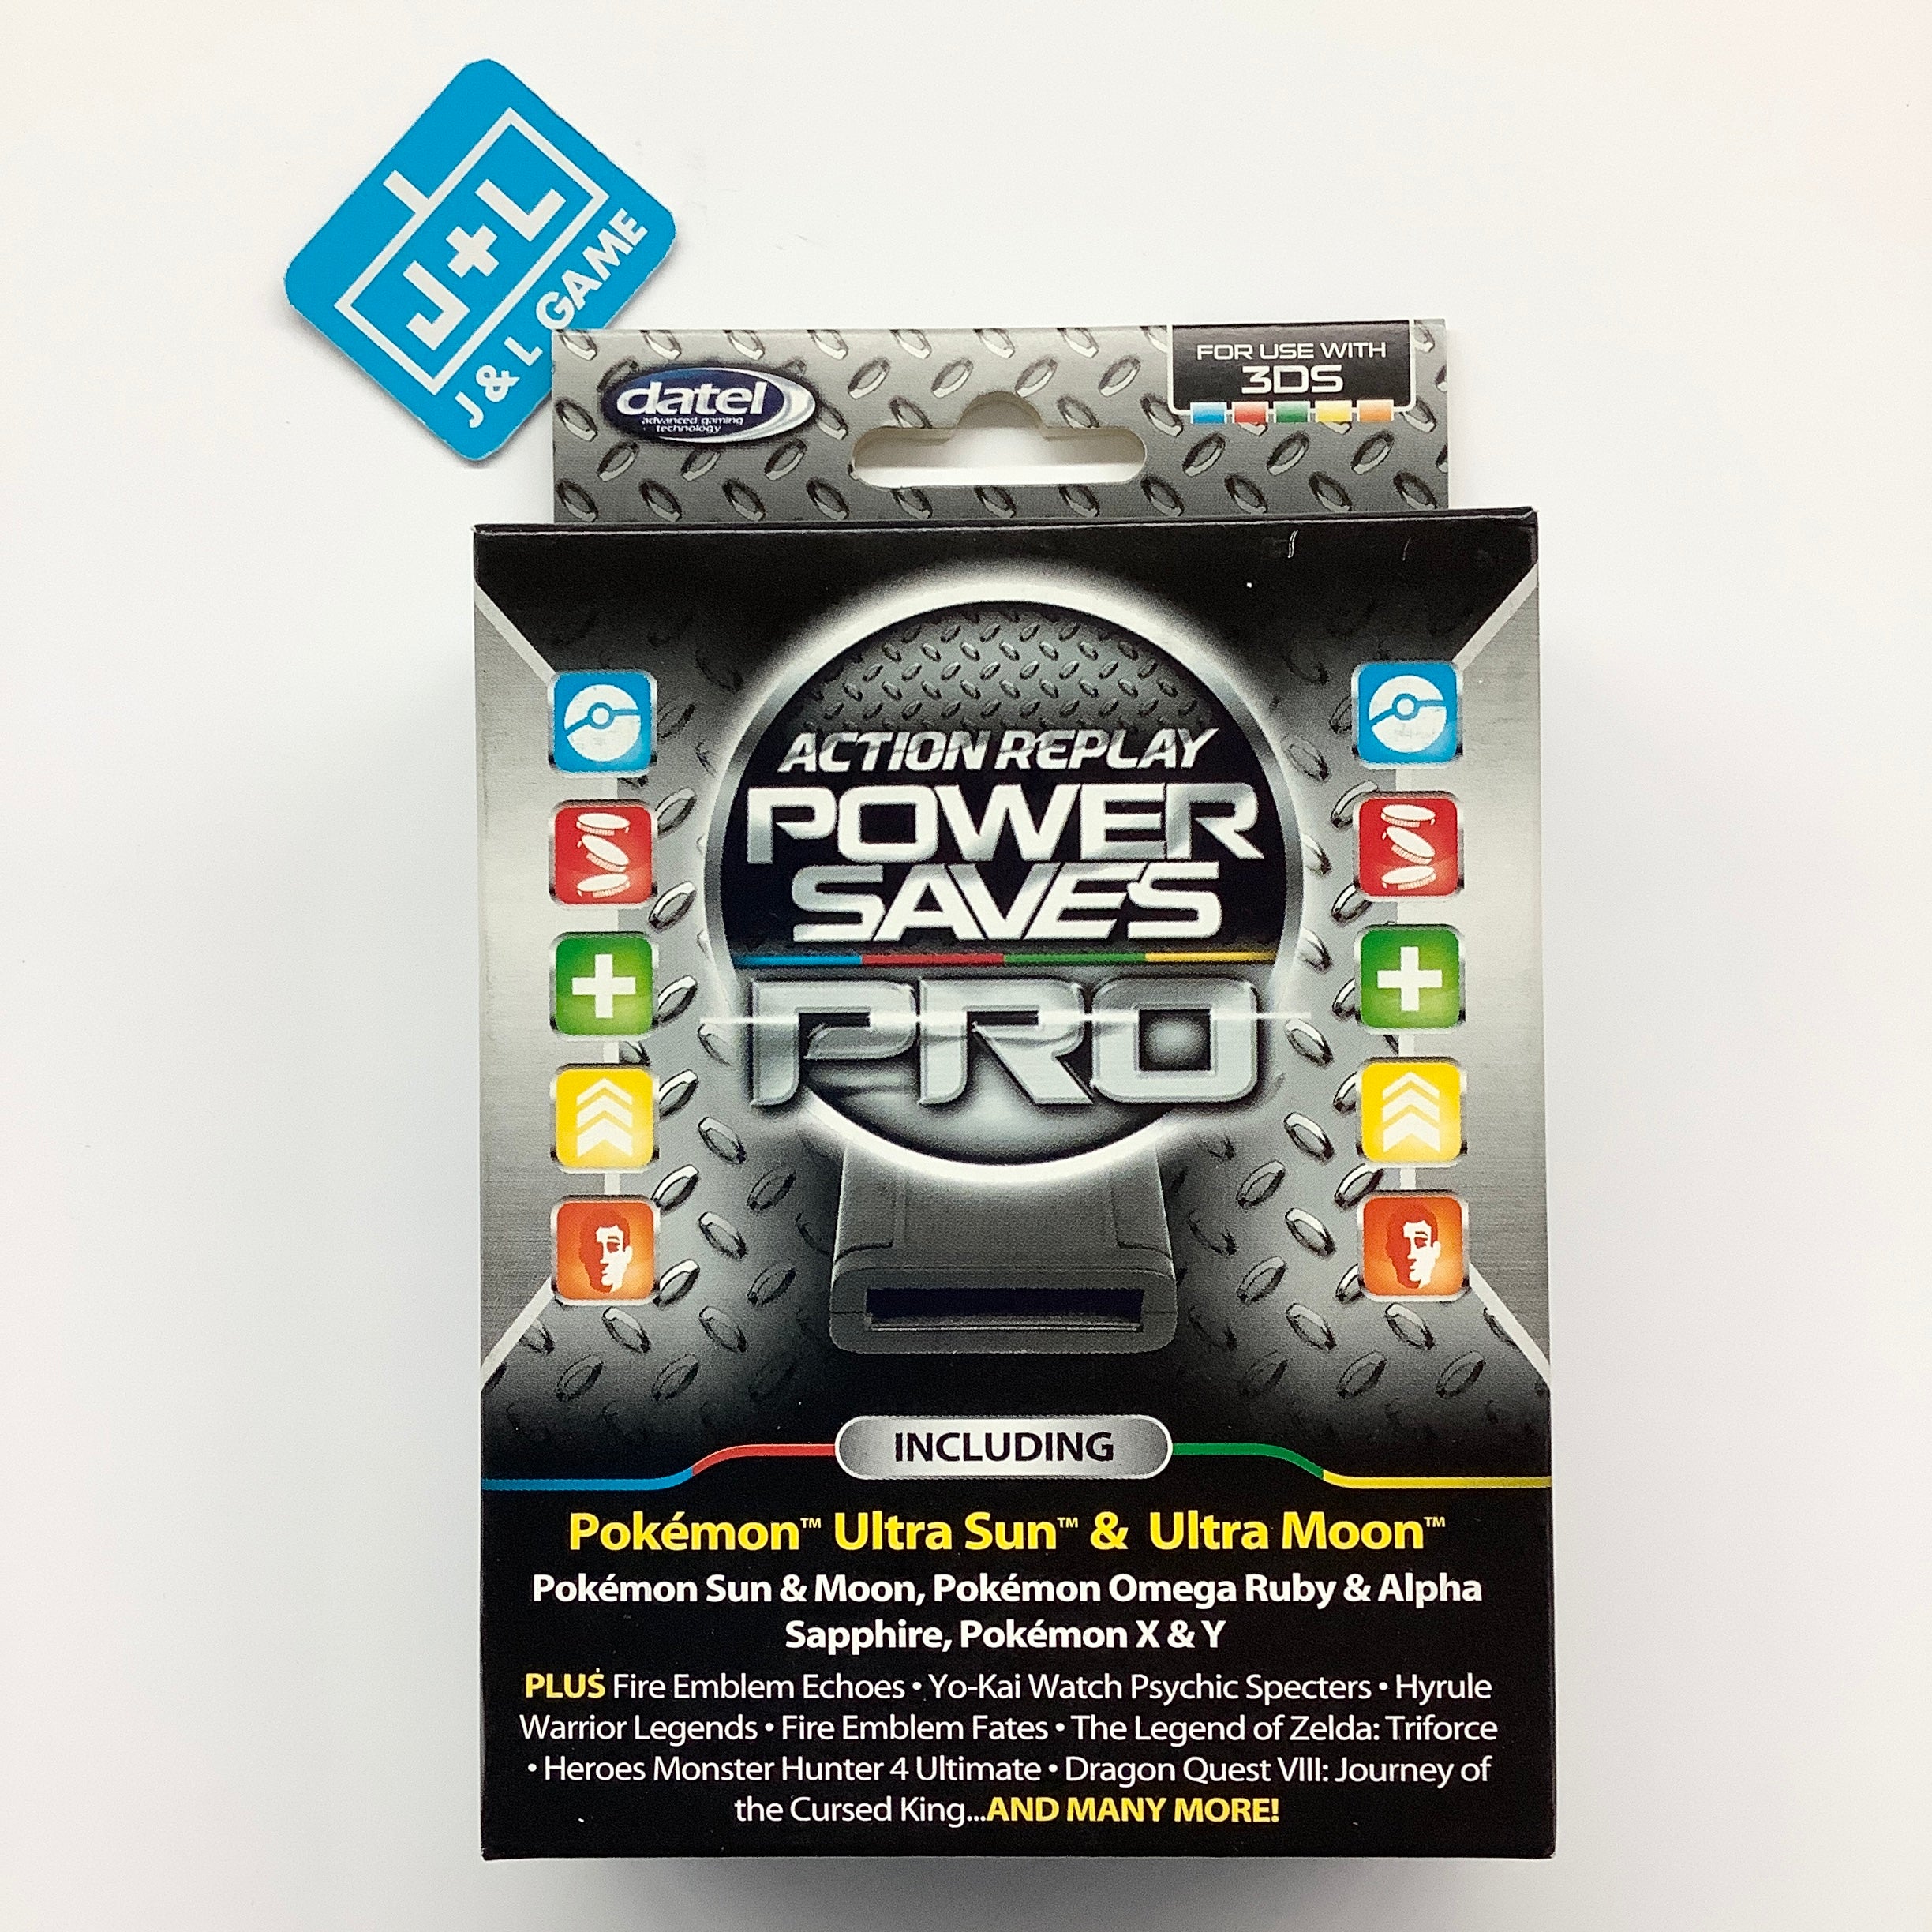 Datel Action Replay Power Saves Pro - Nintendo 3DS Accessories Datel   